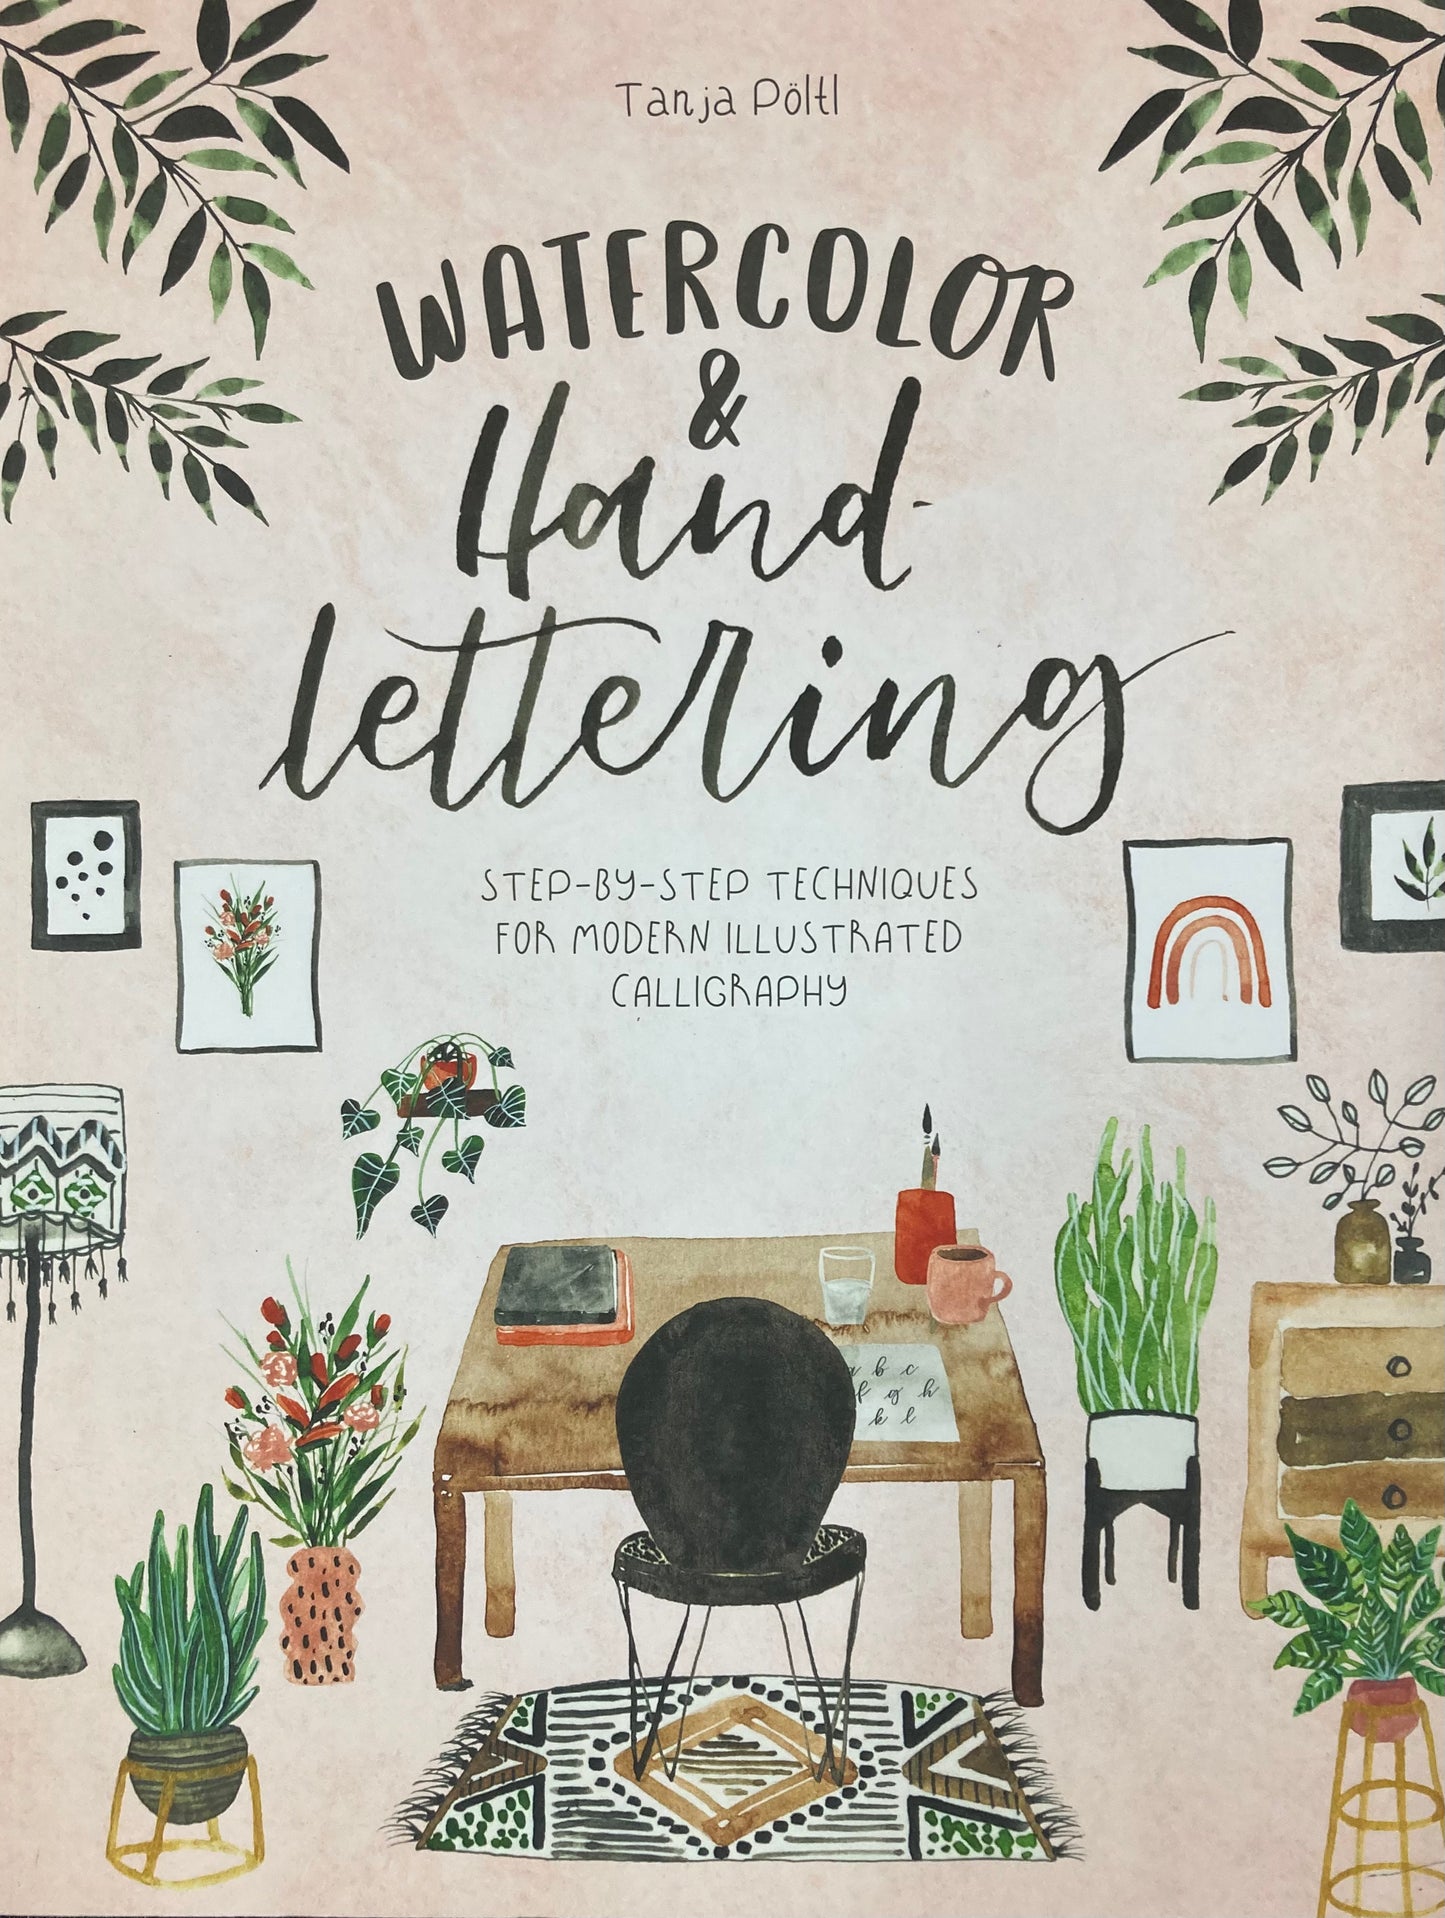 Watercolour & Hand Lettering by Tanja Poltl